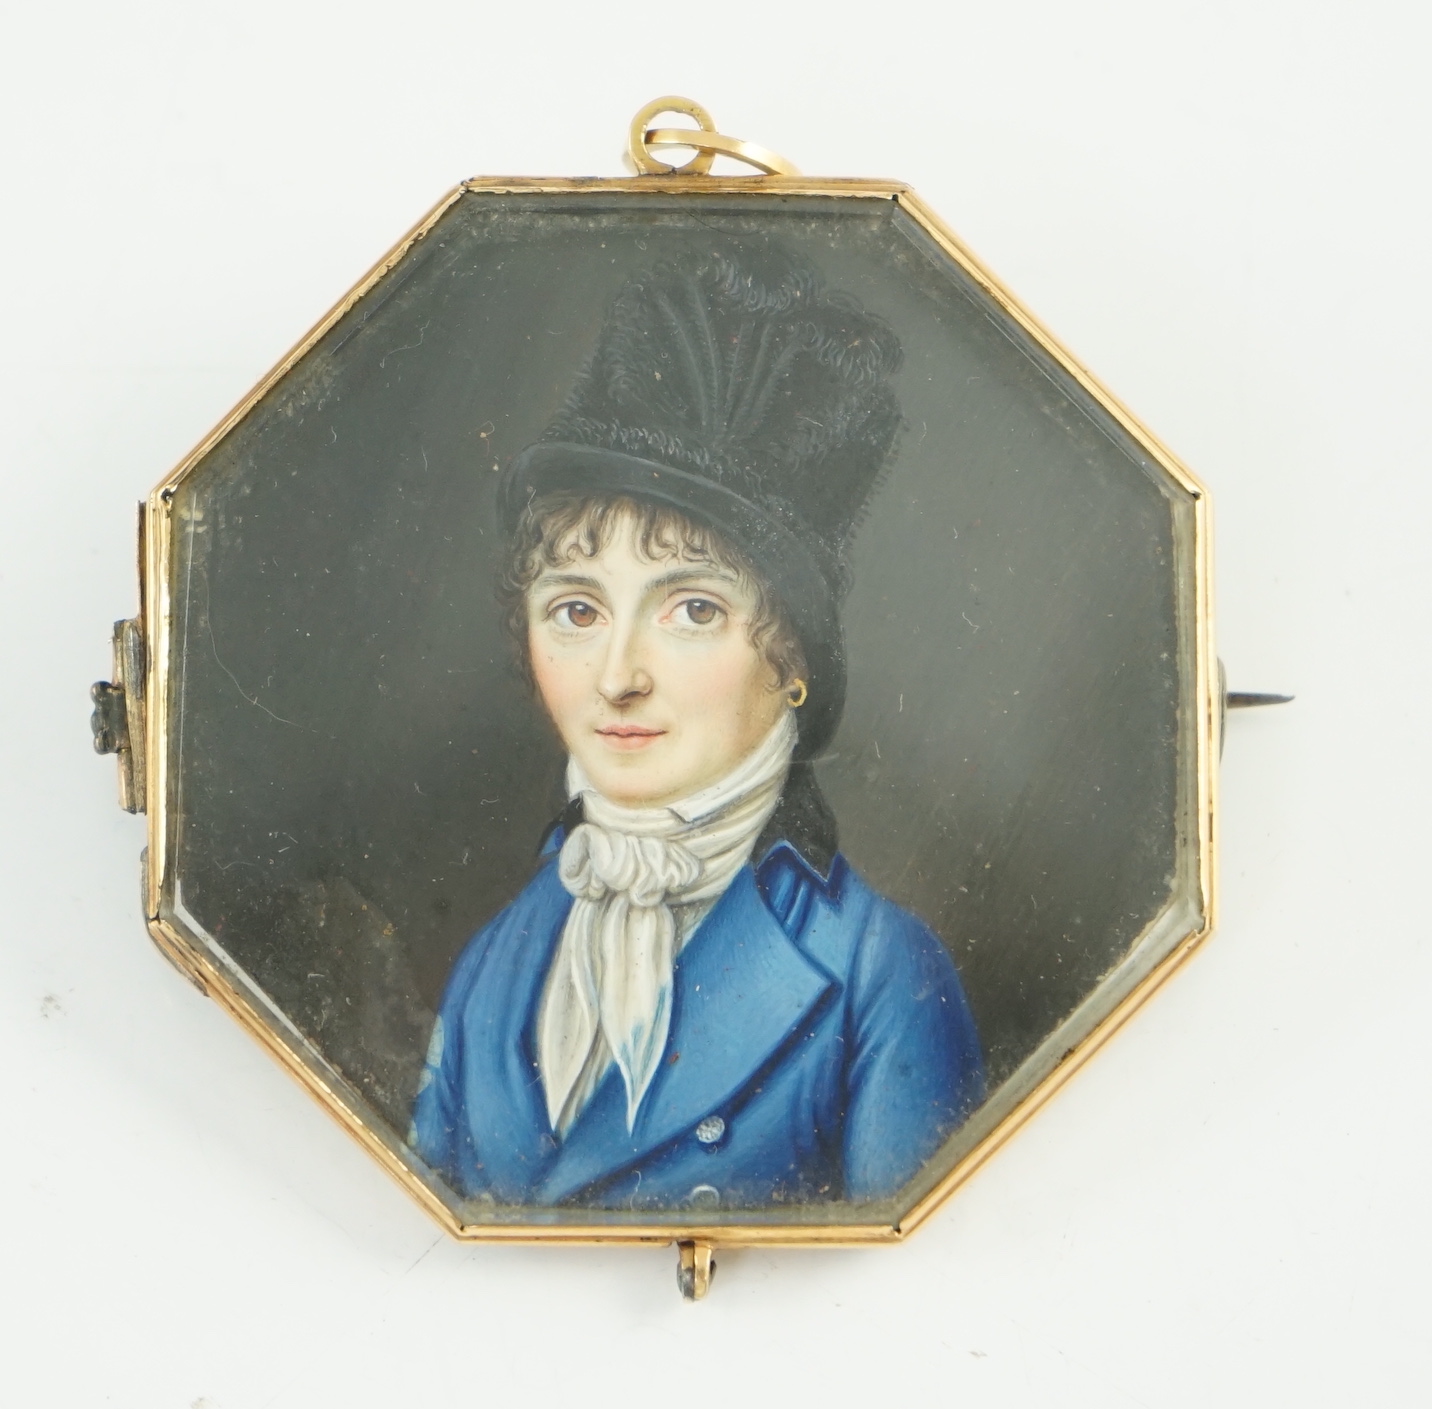 French School circa 1830, Portrait miniature of a lady wearing a black hat and blue coat, watercolour on ivory, 4.9 x 4.9cm. CITES Submission reference P7JVPY2M